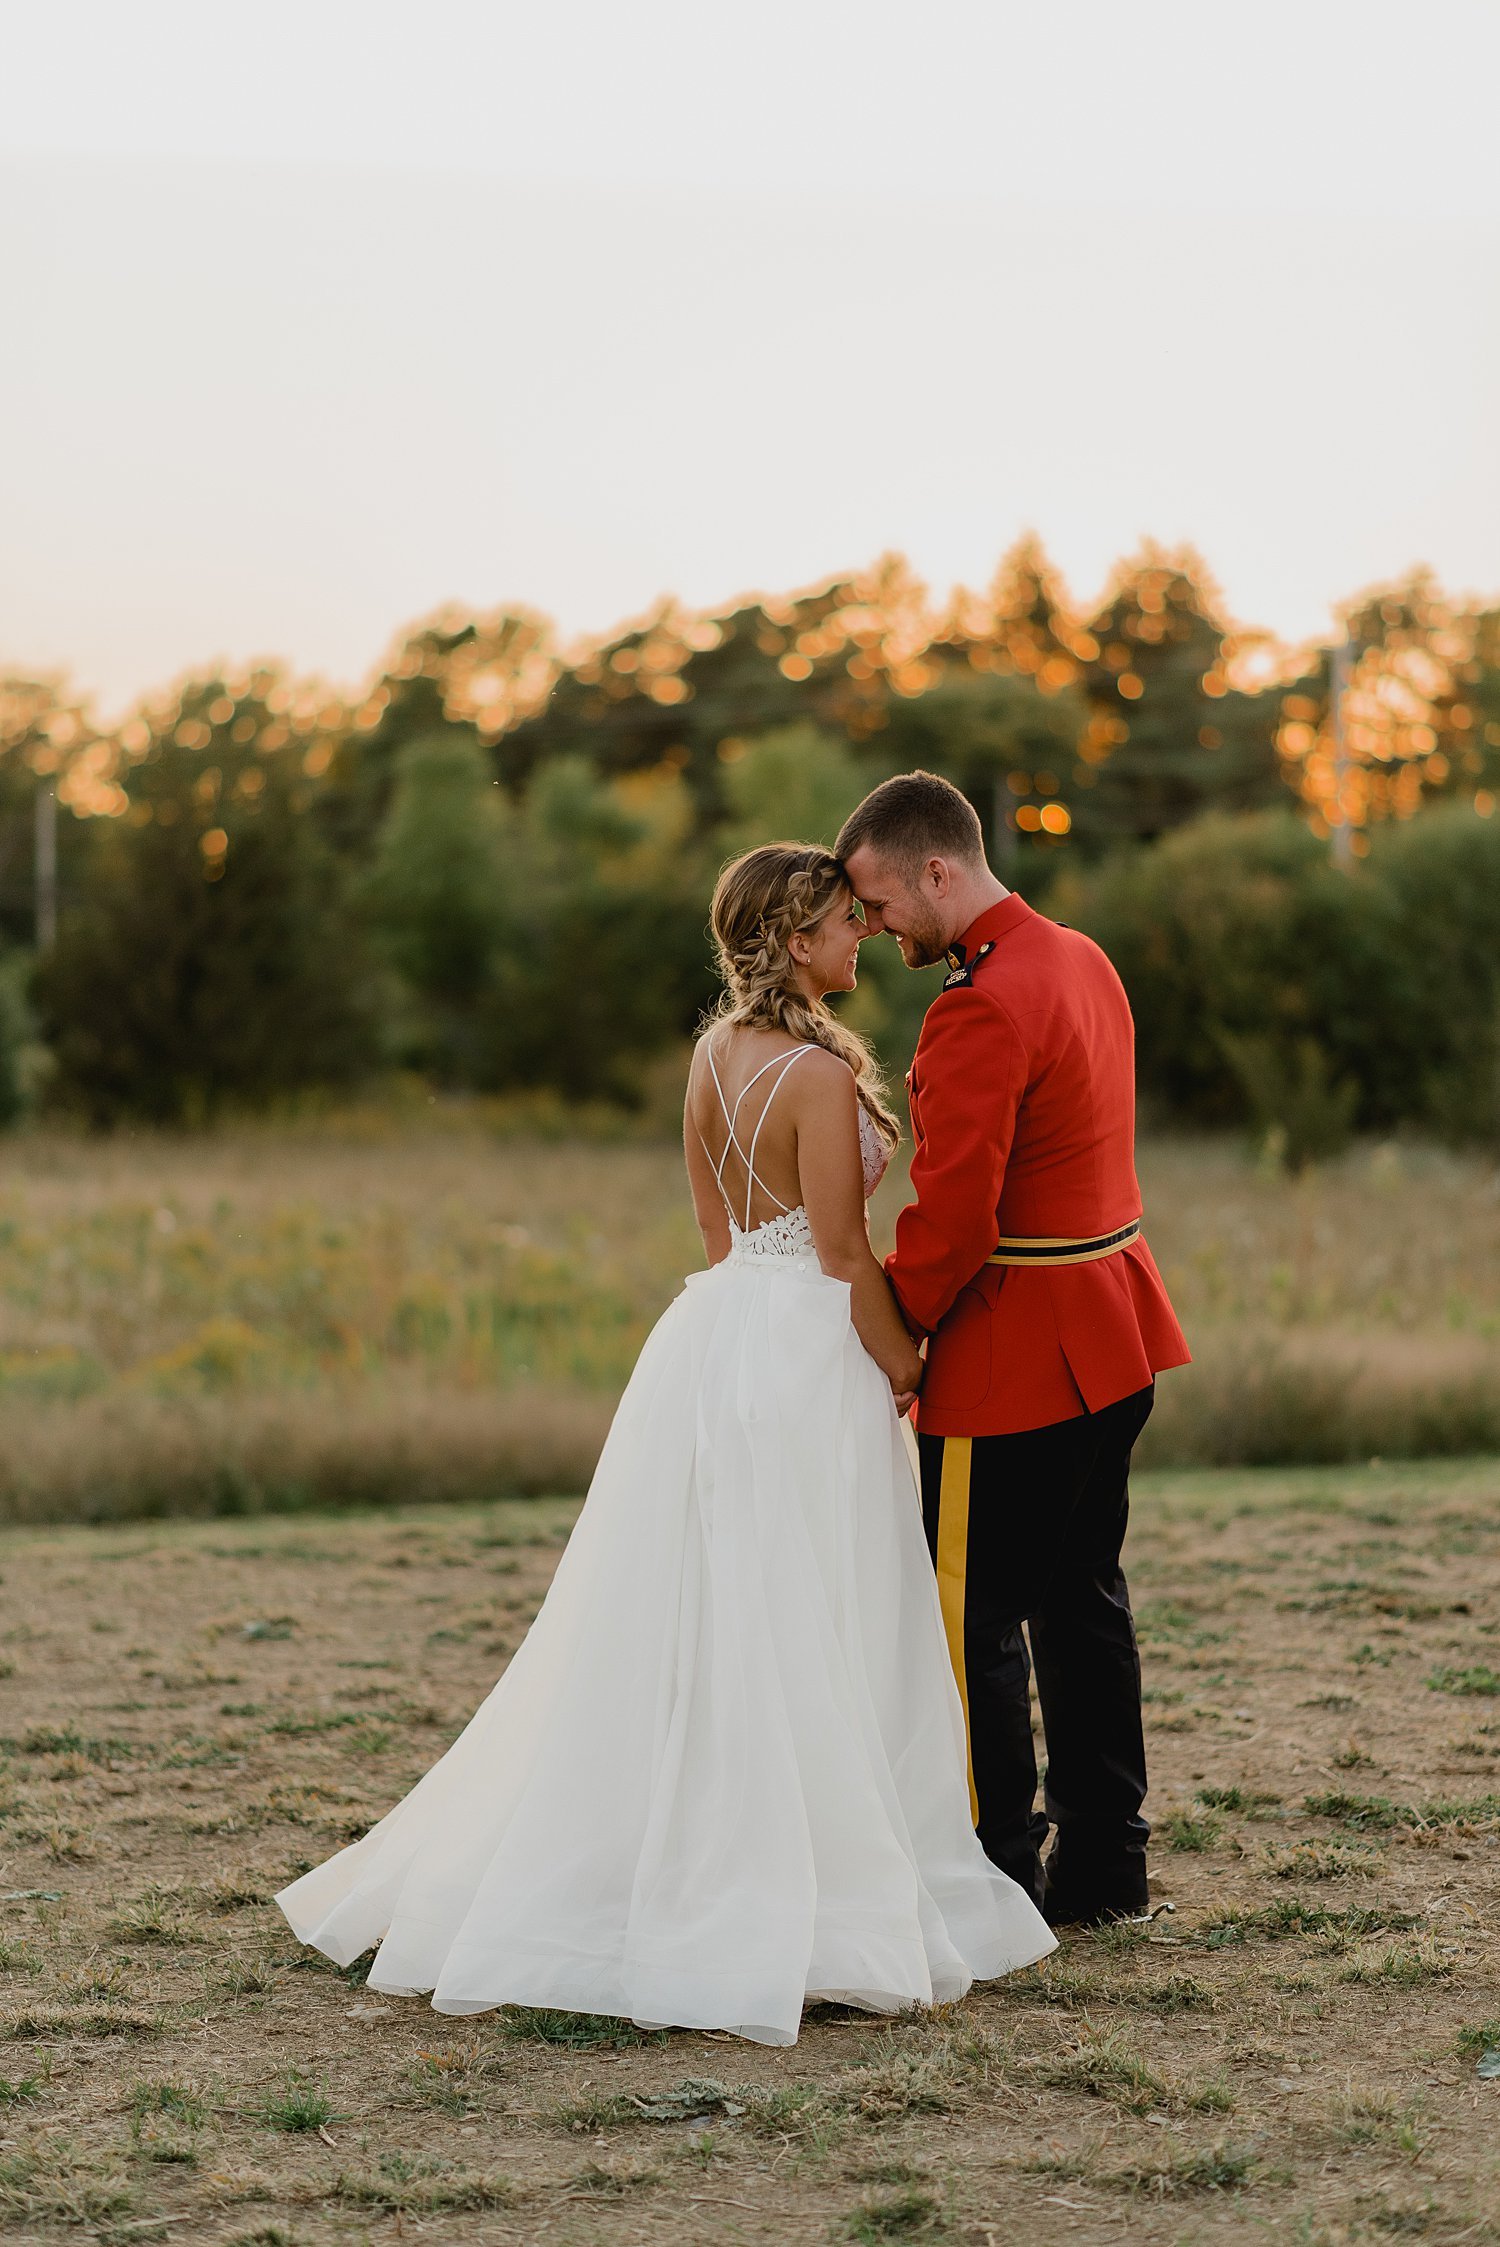 A Royal Canadian Mountie's Intimate Summer Wedding in Prince Edward County | Prince Edward County Wedding Photographer | Holly McMurter Photographs_0074.jpg